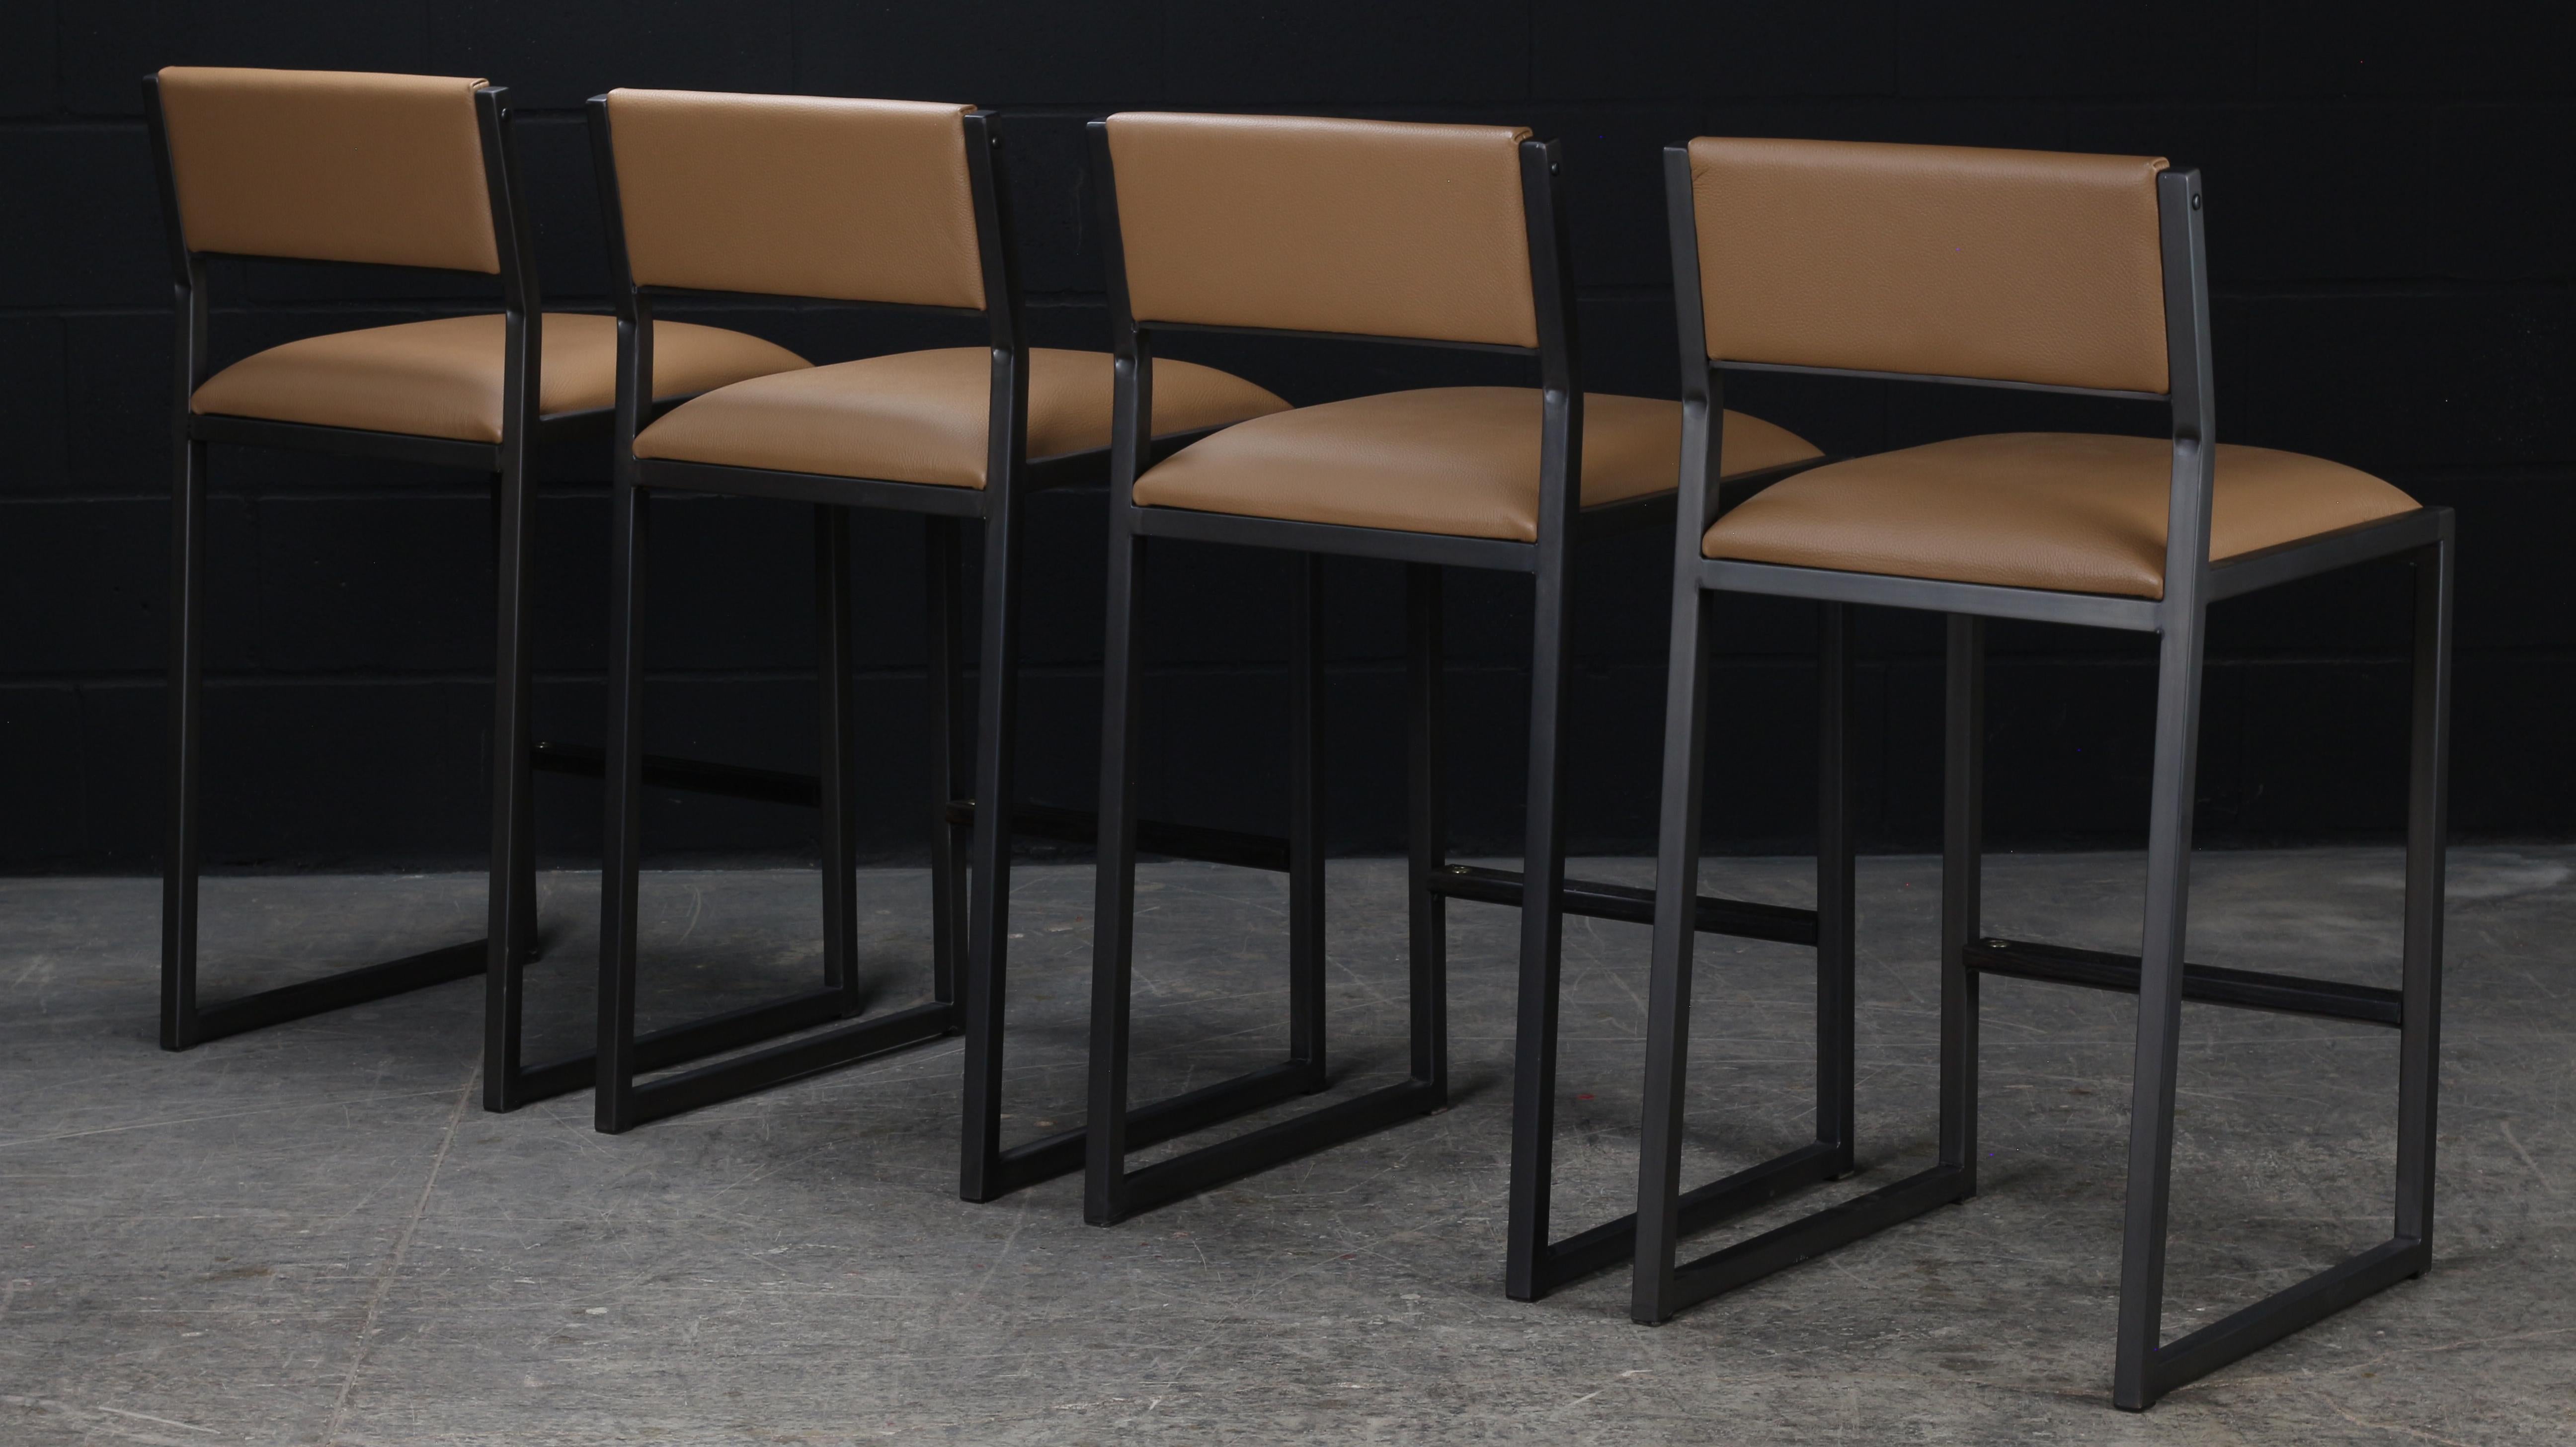 Powder-Coated 4x Shaker Counter Stools in, Sedona Leather, Blackened Steel & Oxidized Oak For Sale